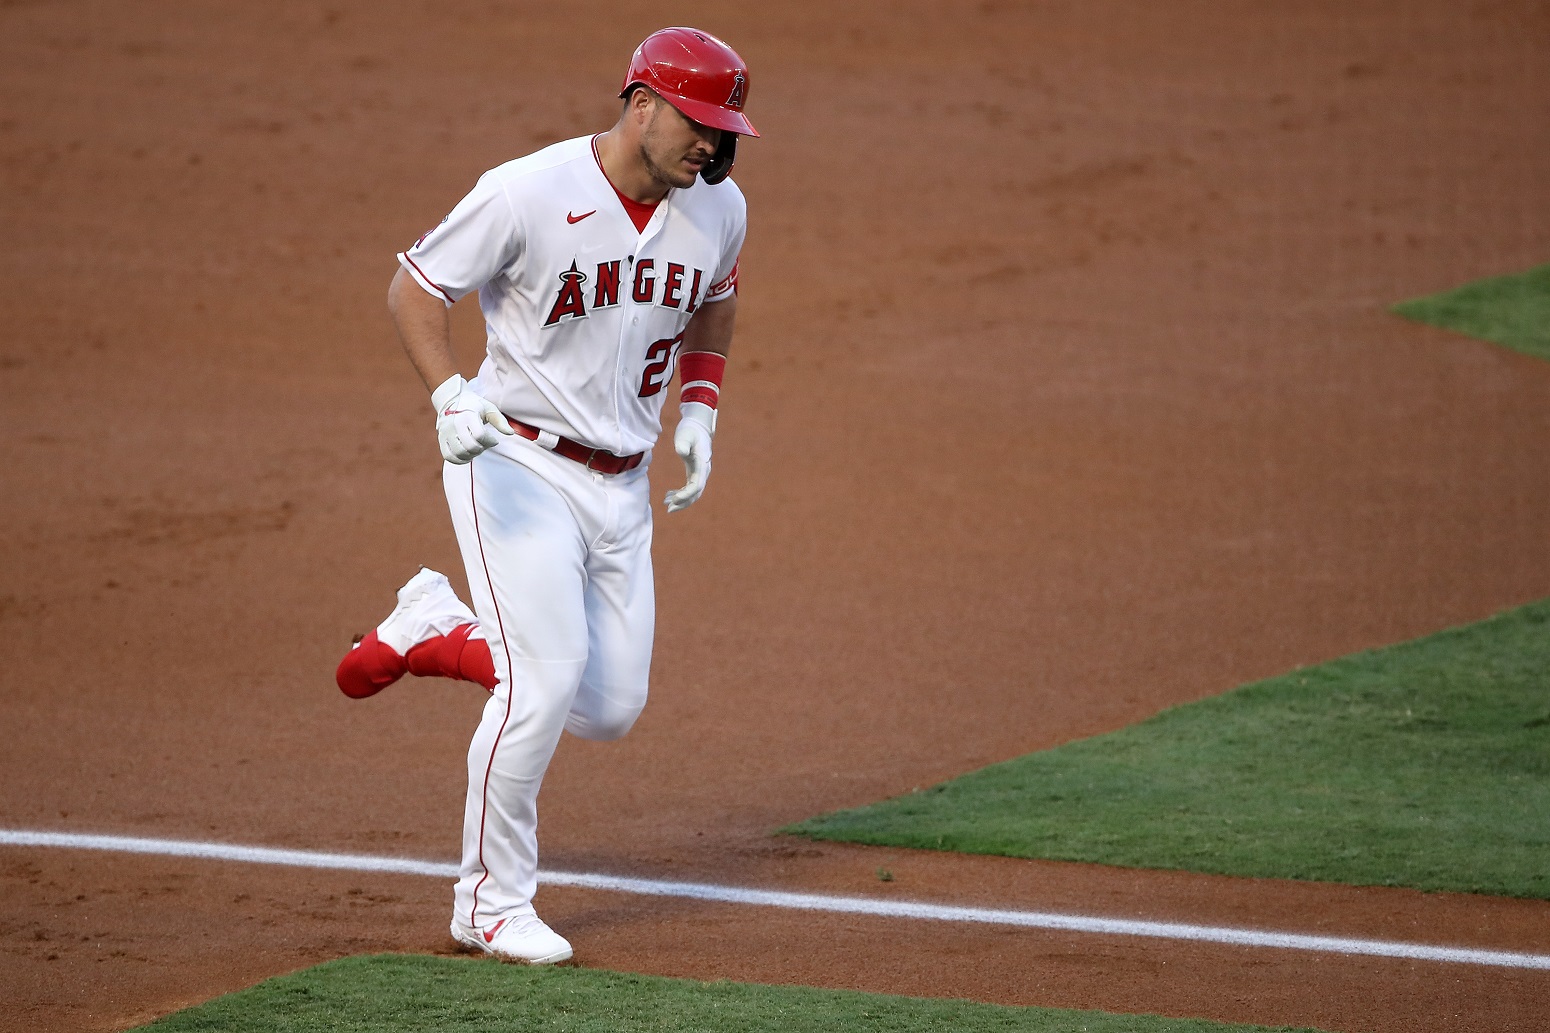 Mike Trout Just Did Something That Not Even Willie Mays Could Do